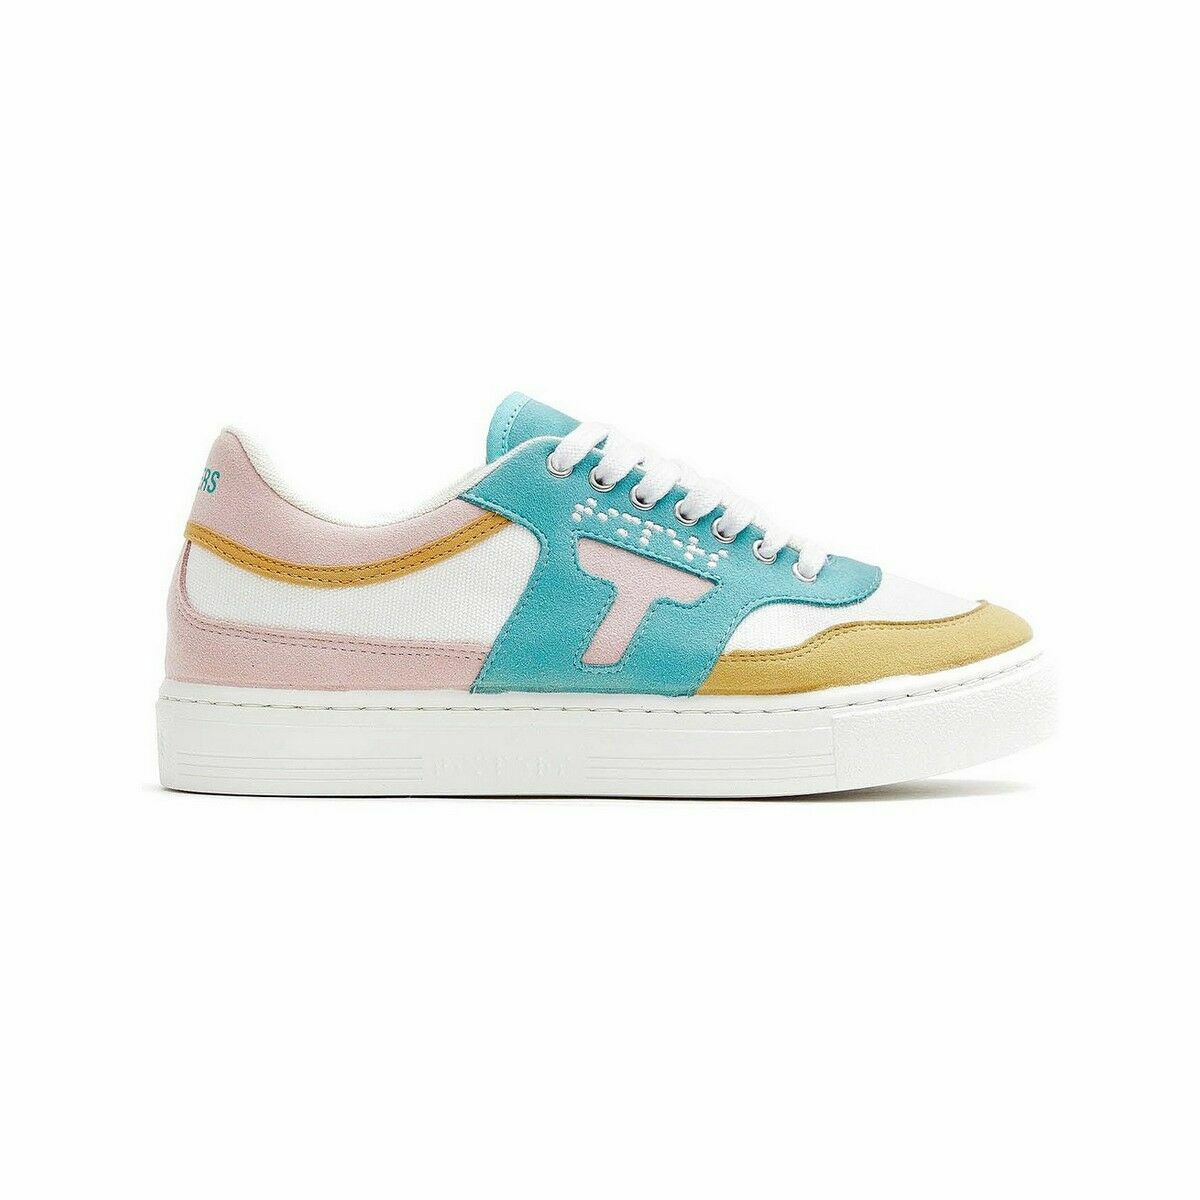 Ténis Casual Timpers Trend Pastel - azul - 